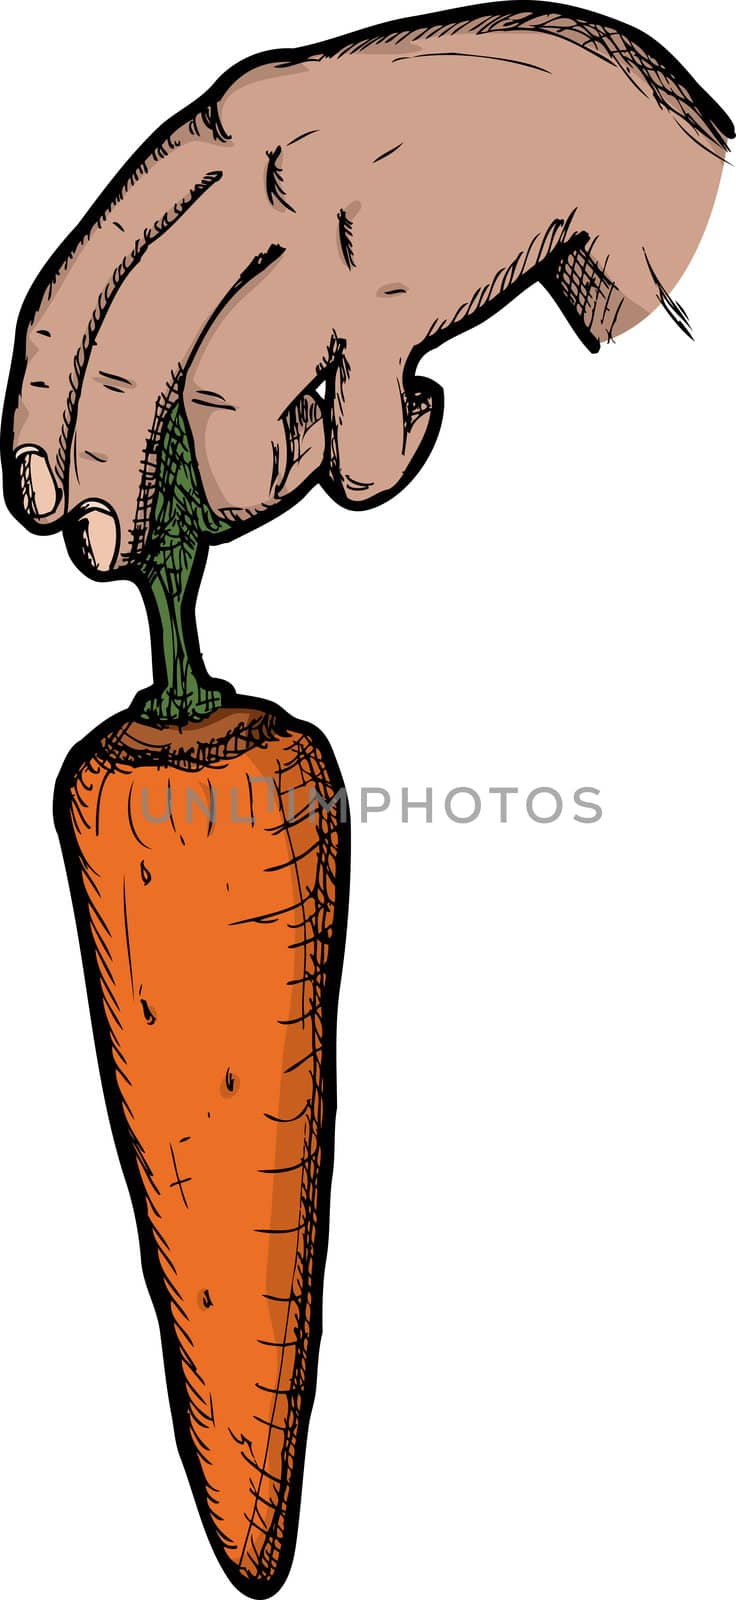 Dangling a carrot illustration on white background